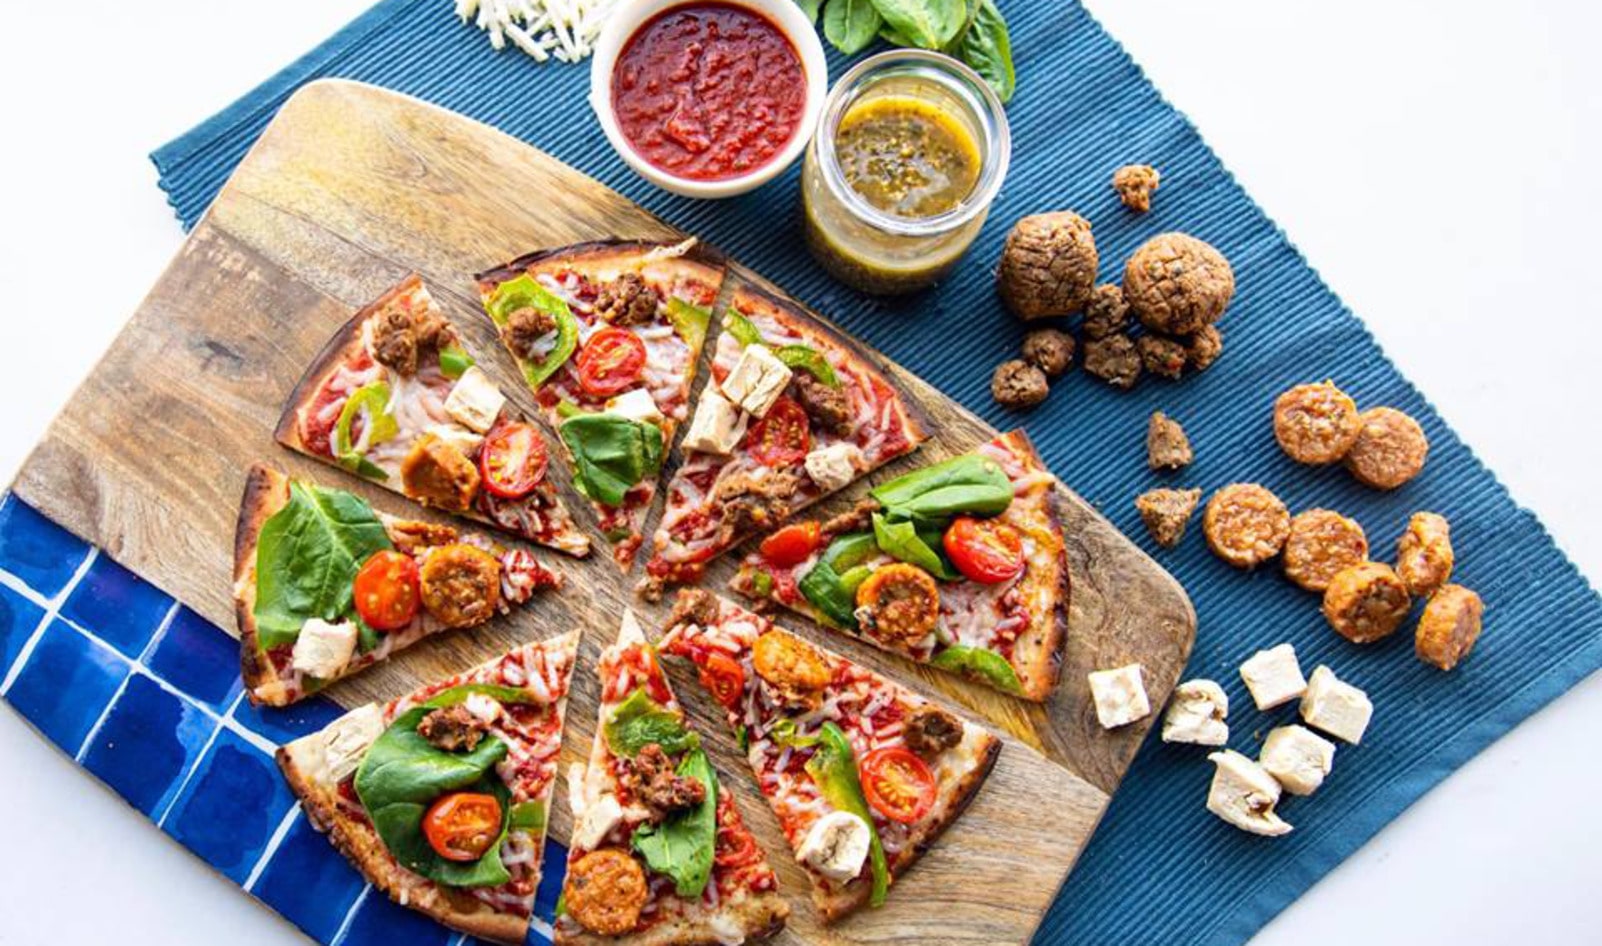 Pieology Becomes First National Pizza Chain to Offer Vegan Meat Toppings